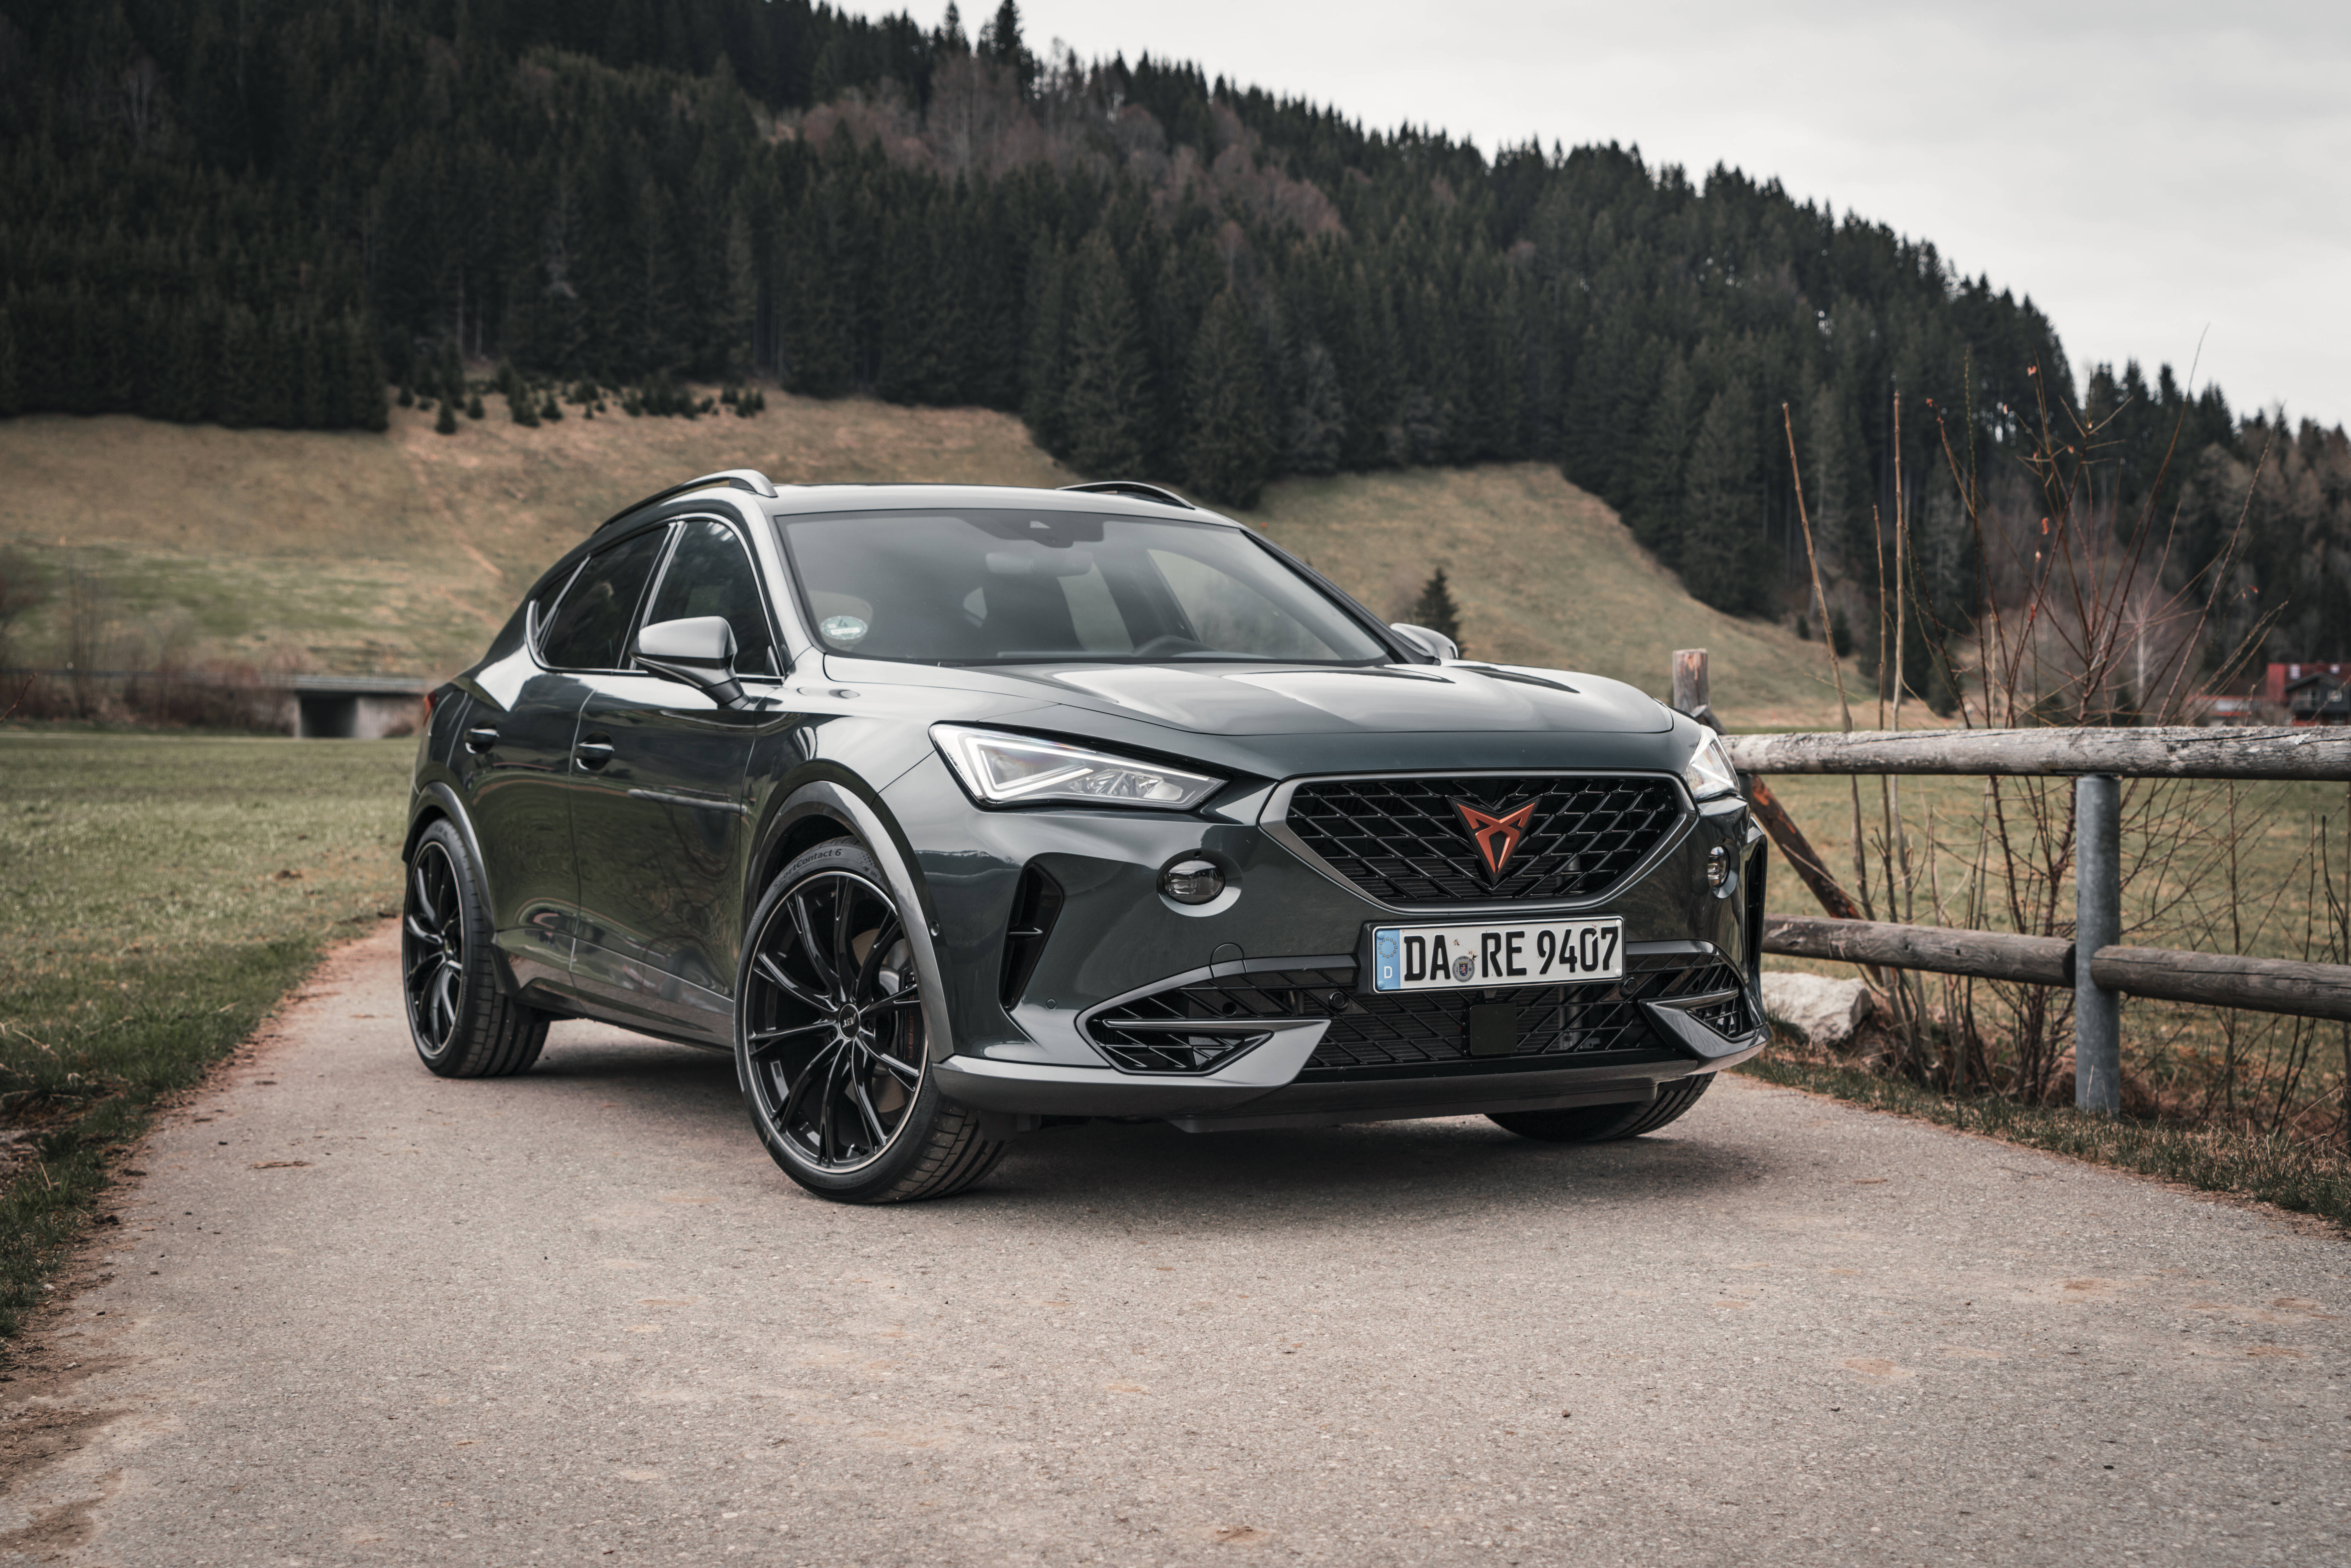 CUPRA FORMENTOR: MAXIMUM PERFORMANCE WITH CHIP TUNING